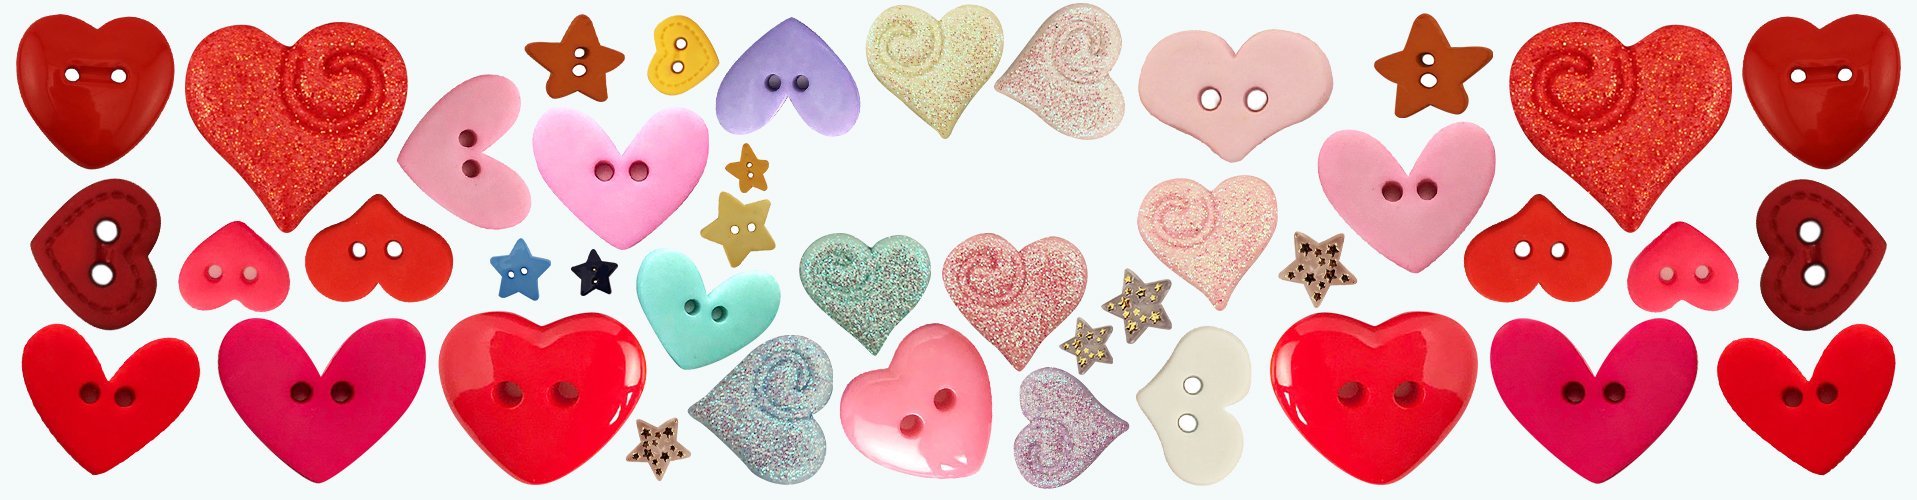 Hearts & Stars Themes | Buttons Galore and More